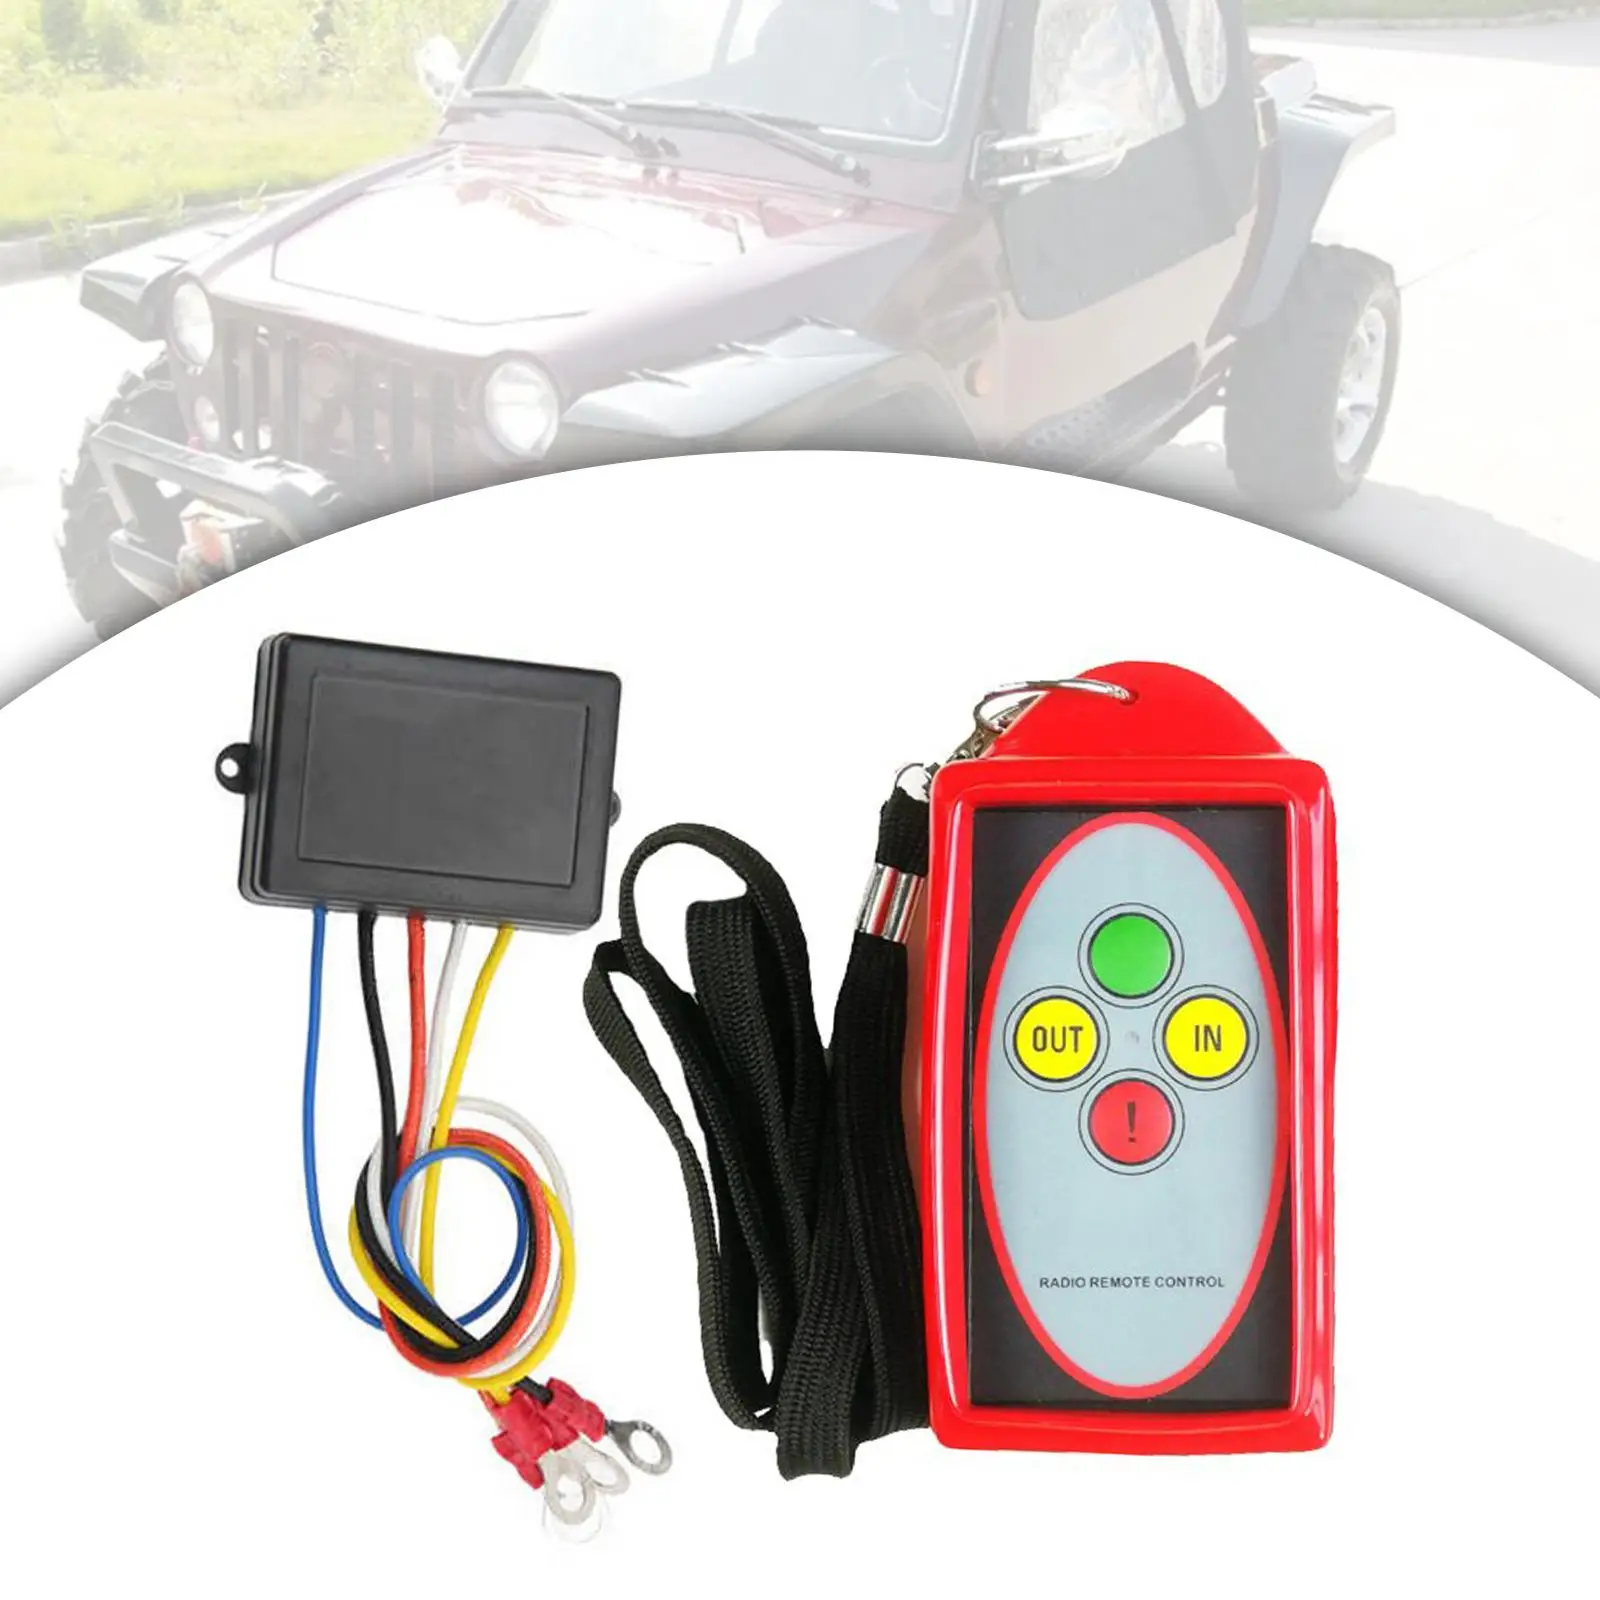 Winch Wireless Remote Control Switch Kit Receiver Module Transmitter Car Accessories Replaces for Truck Trailer SUV Vehicle